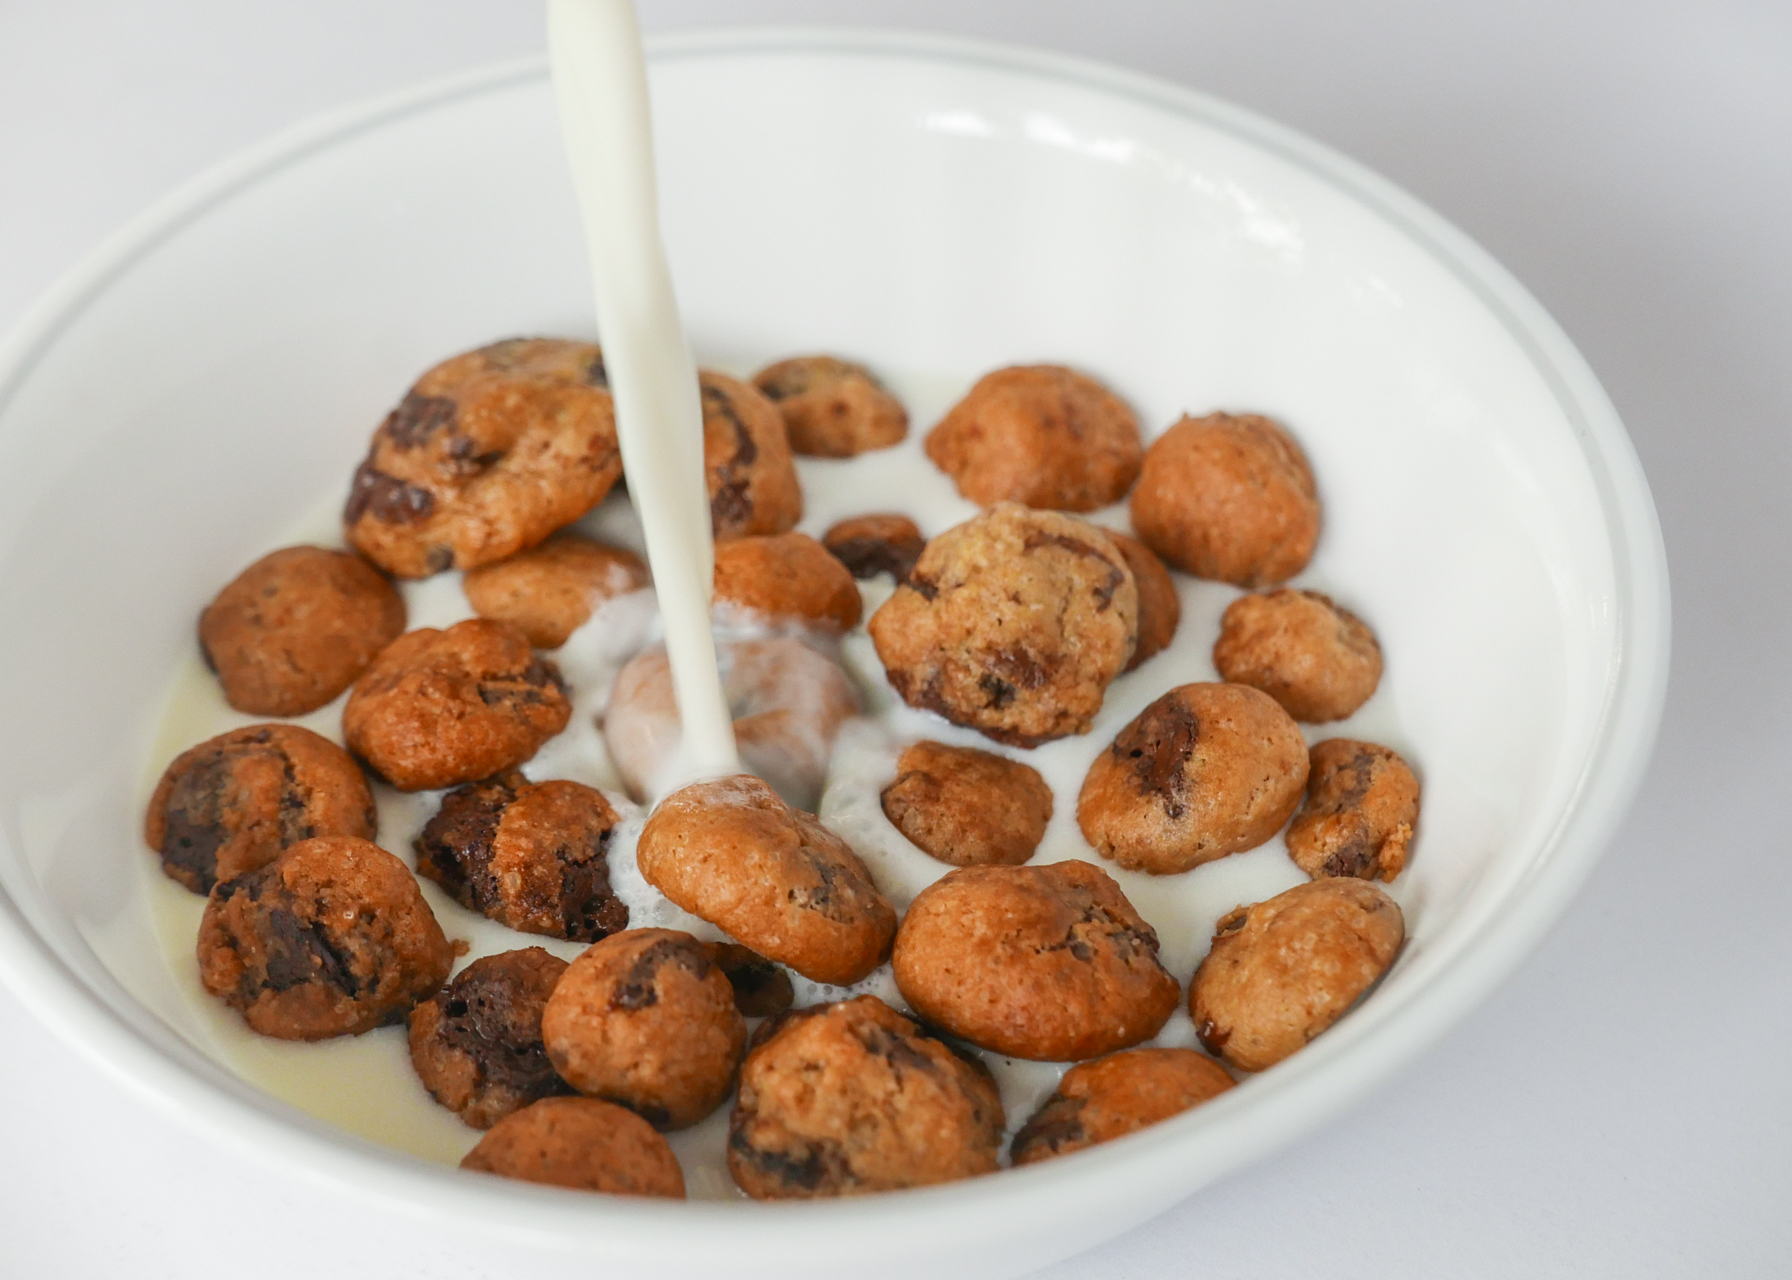 Here’s A New Recipe To Try: Cookie Cereal!